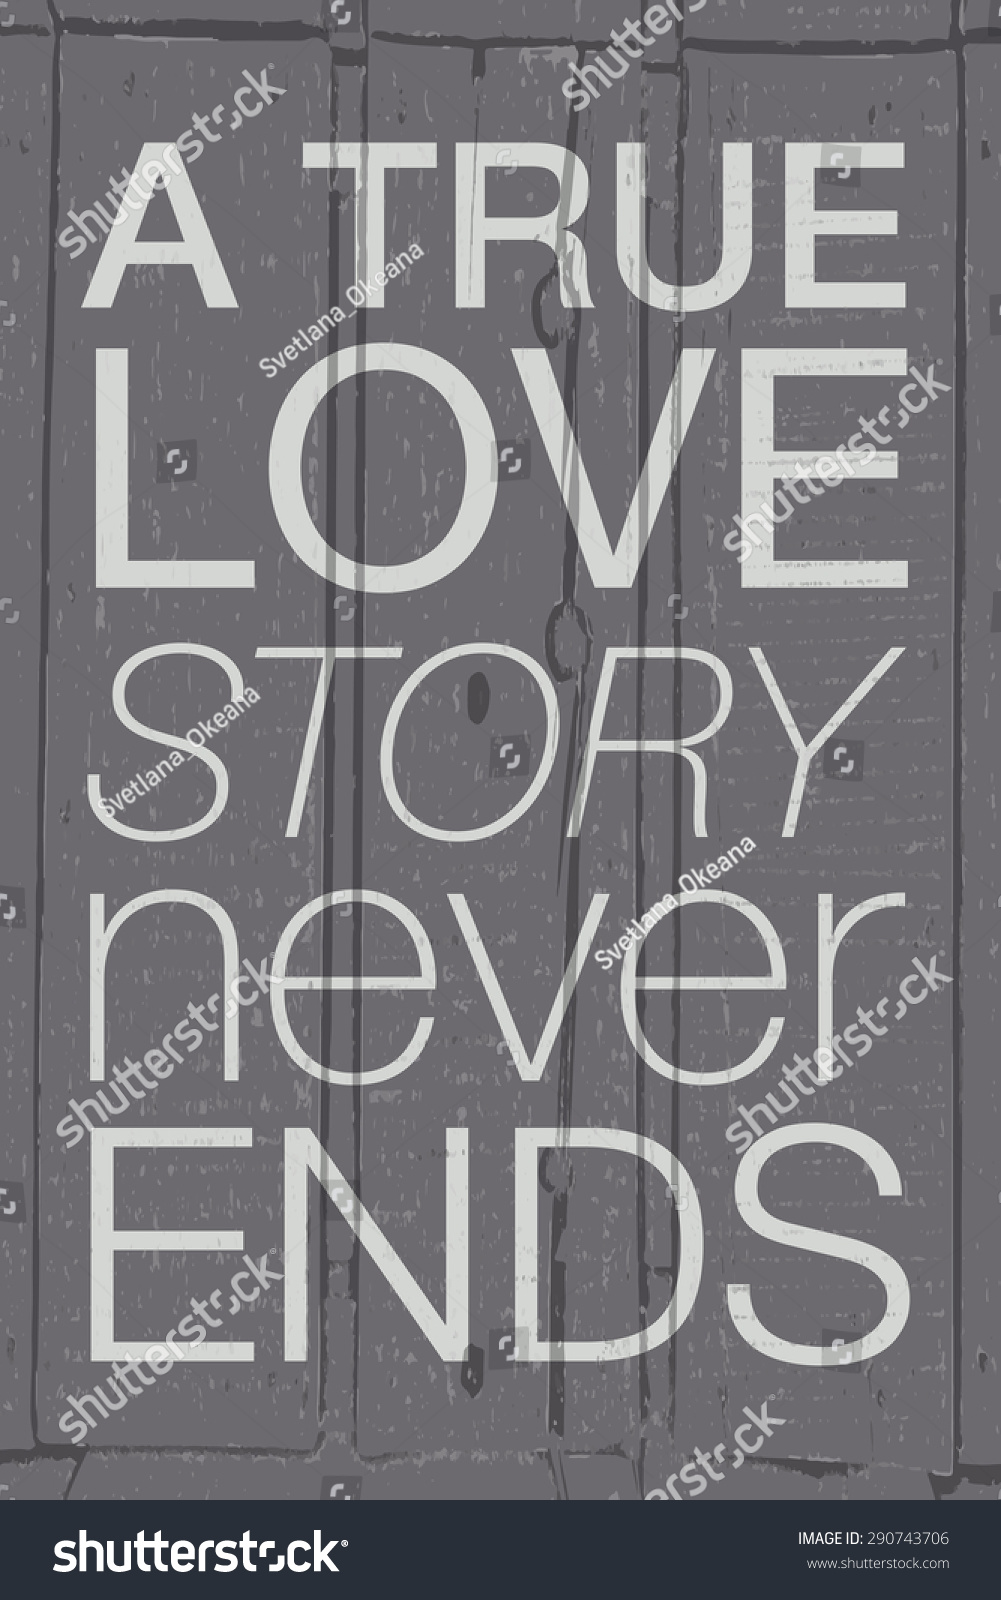 Romantic quote "A true love story never ends" on